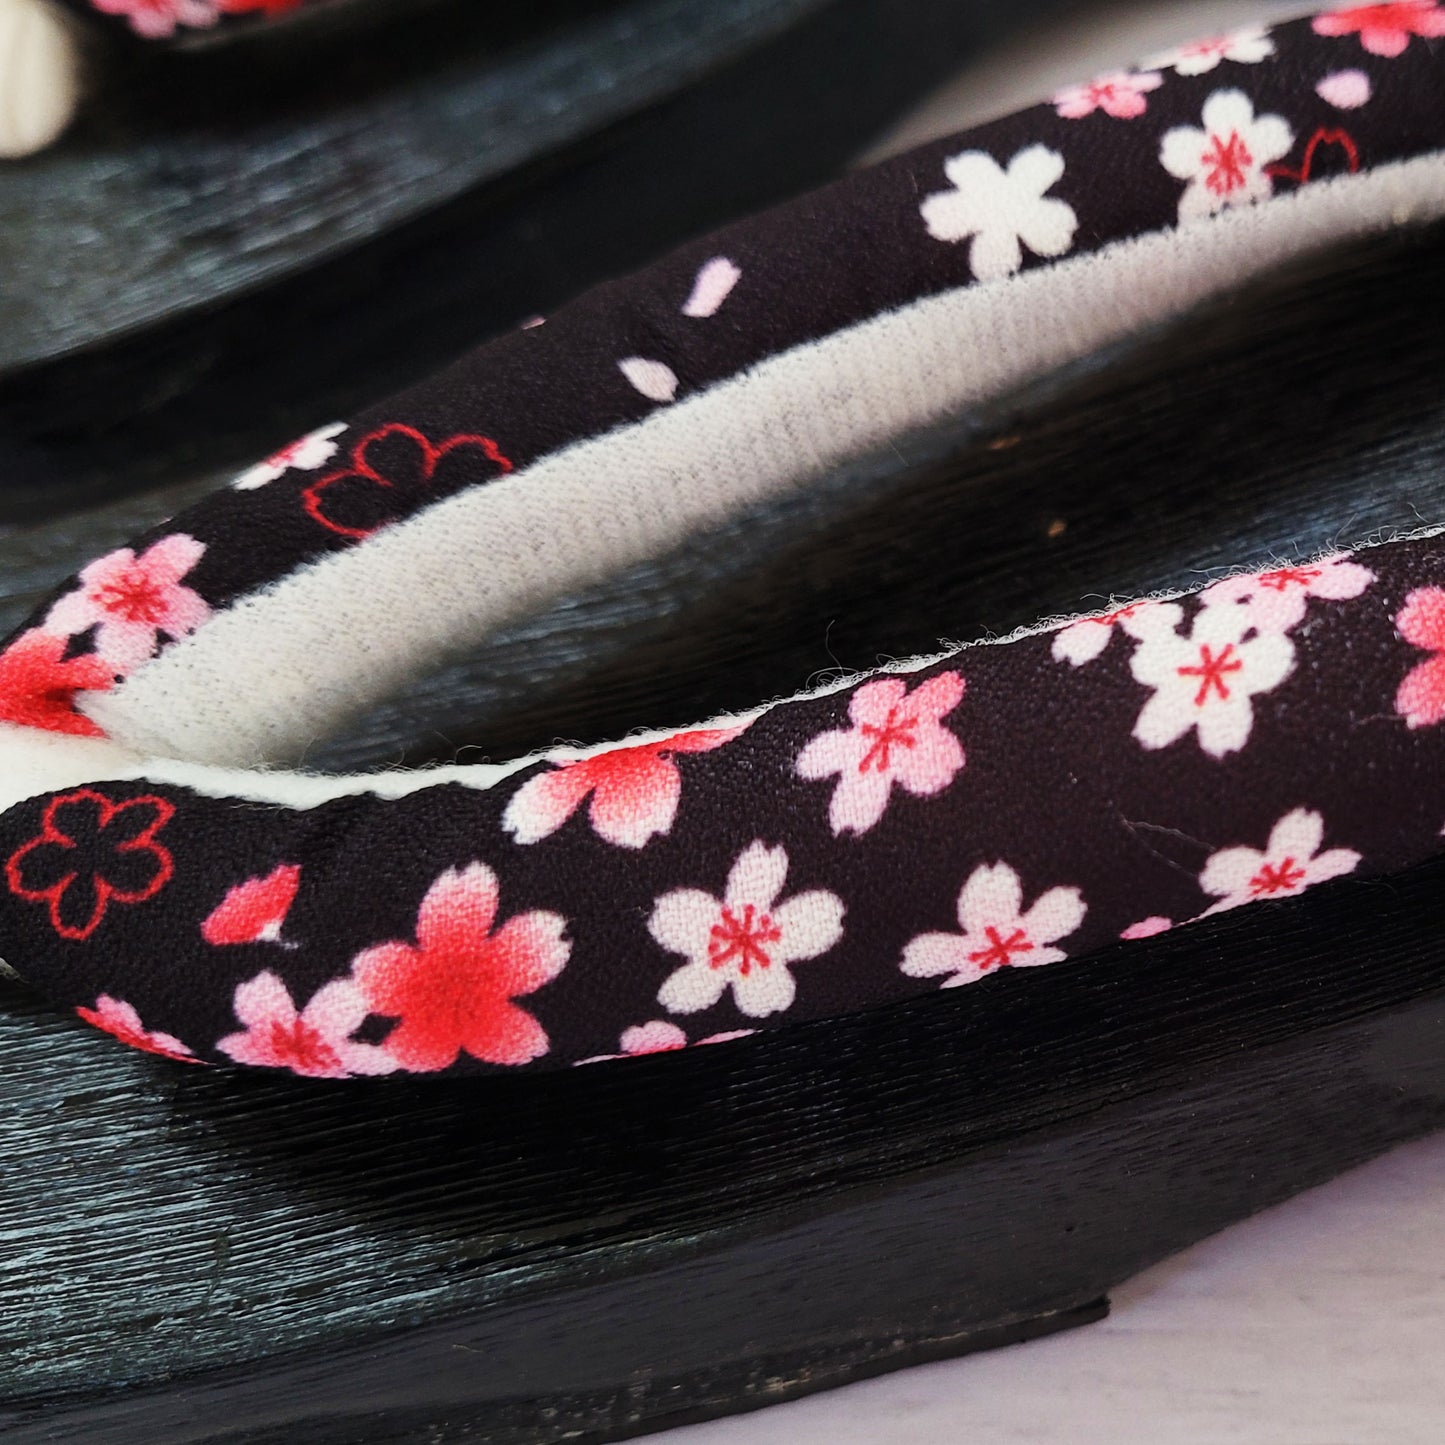 Japanese Geta Sandals with Cherry Blossoms